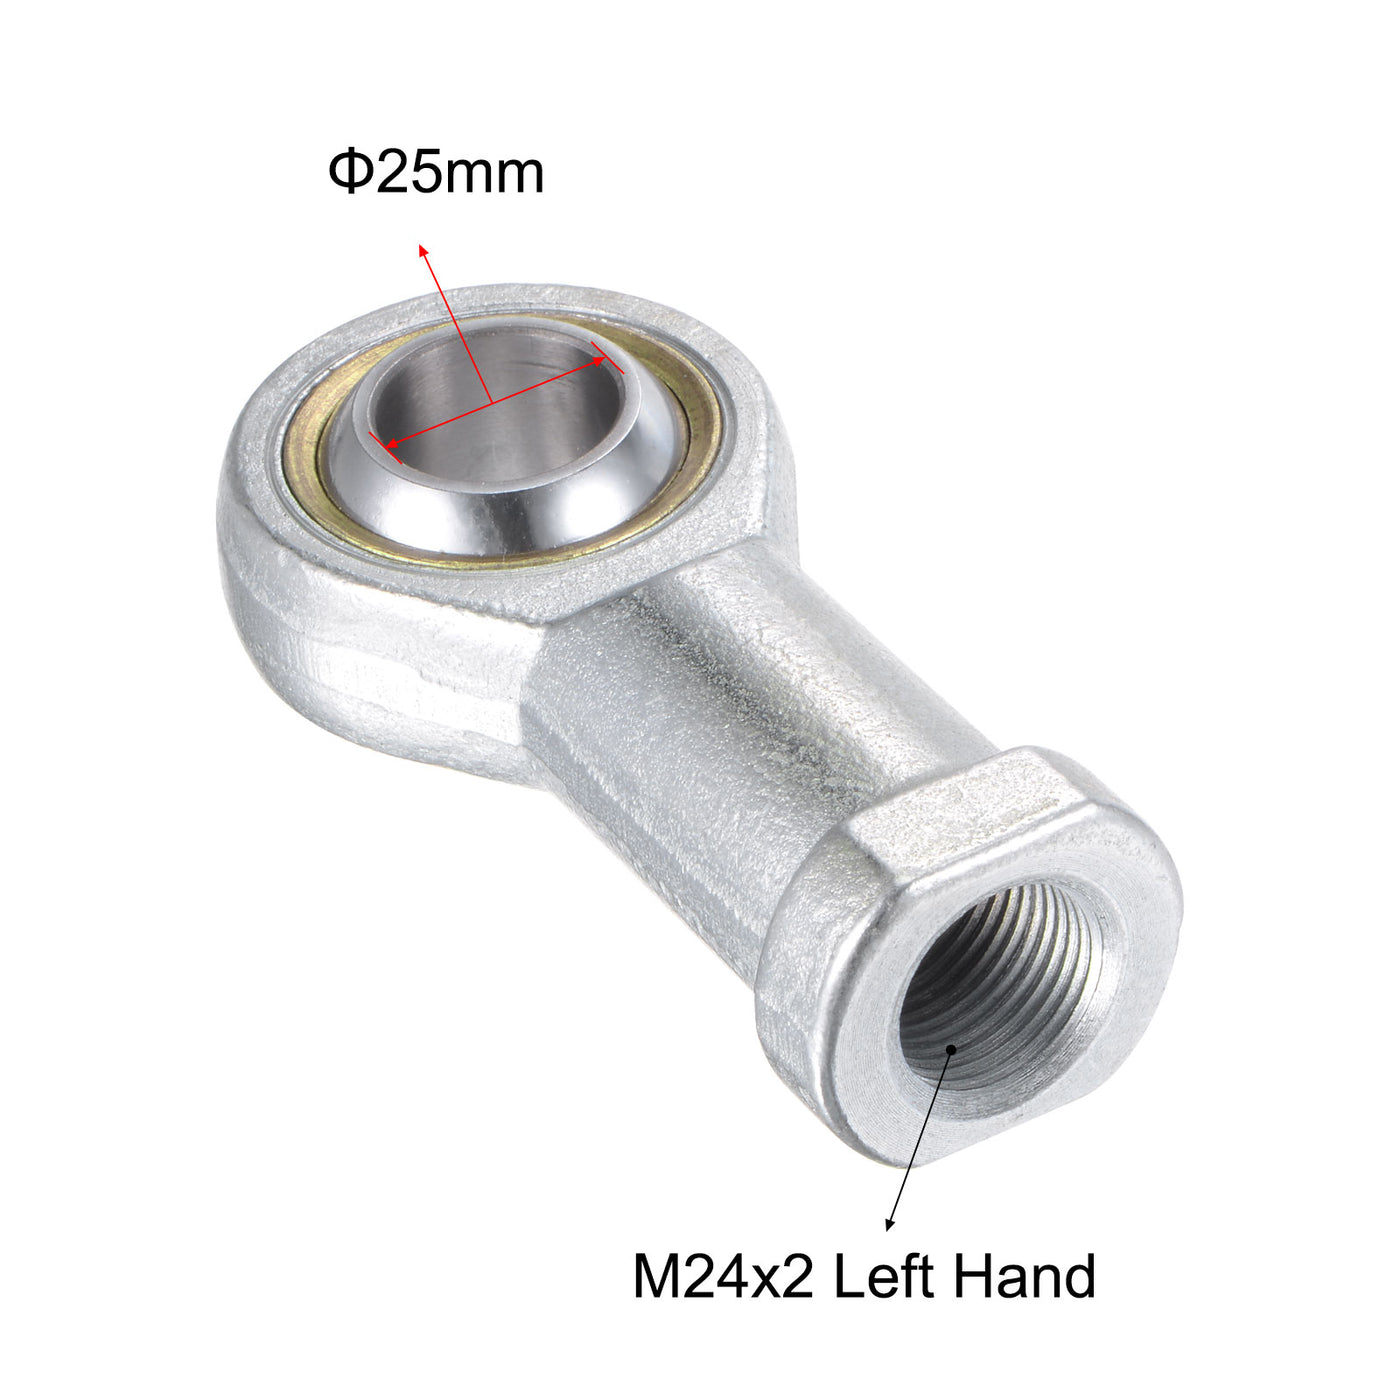 uxcell Uxcell SI25TK PHSA25 Rod End Bearing 25mm Bore M24x2 Left Hand Female Thread